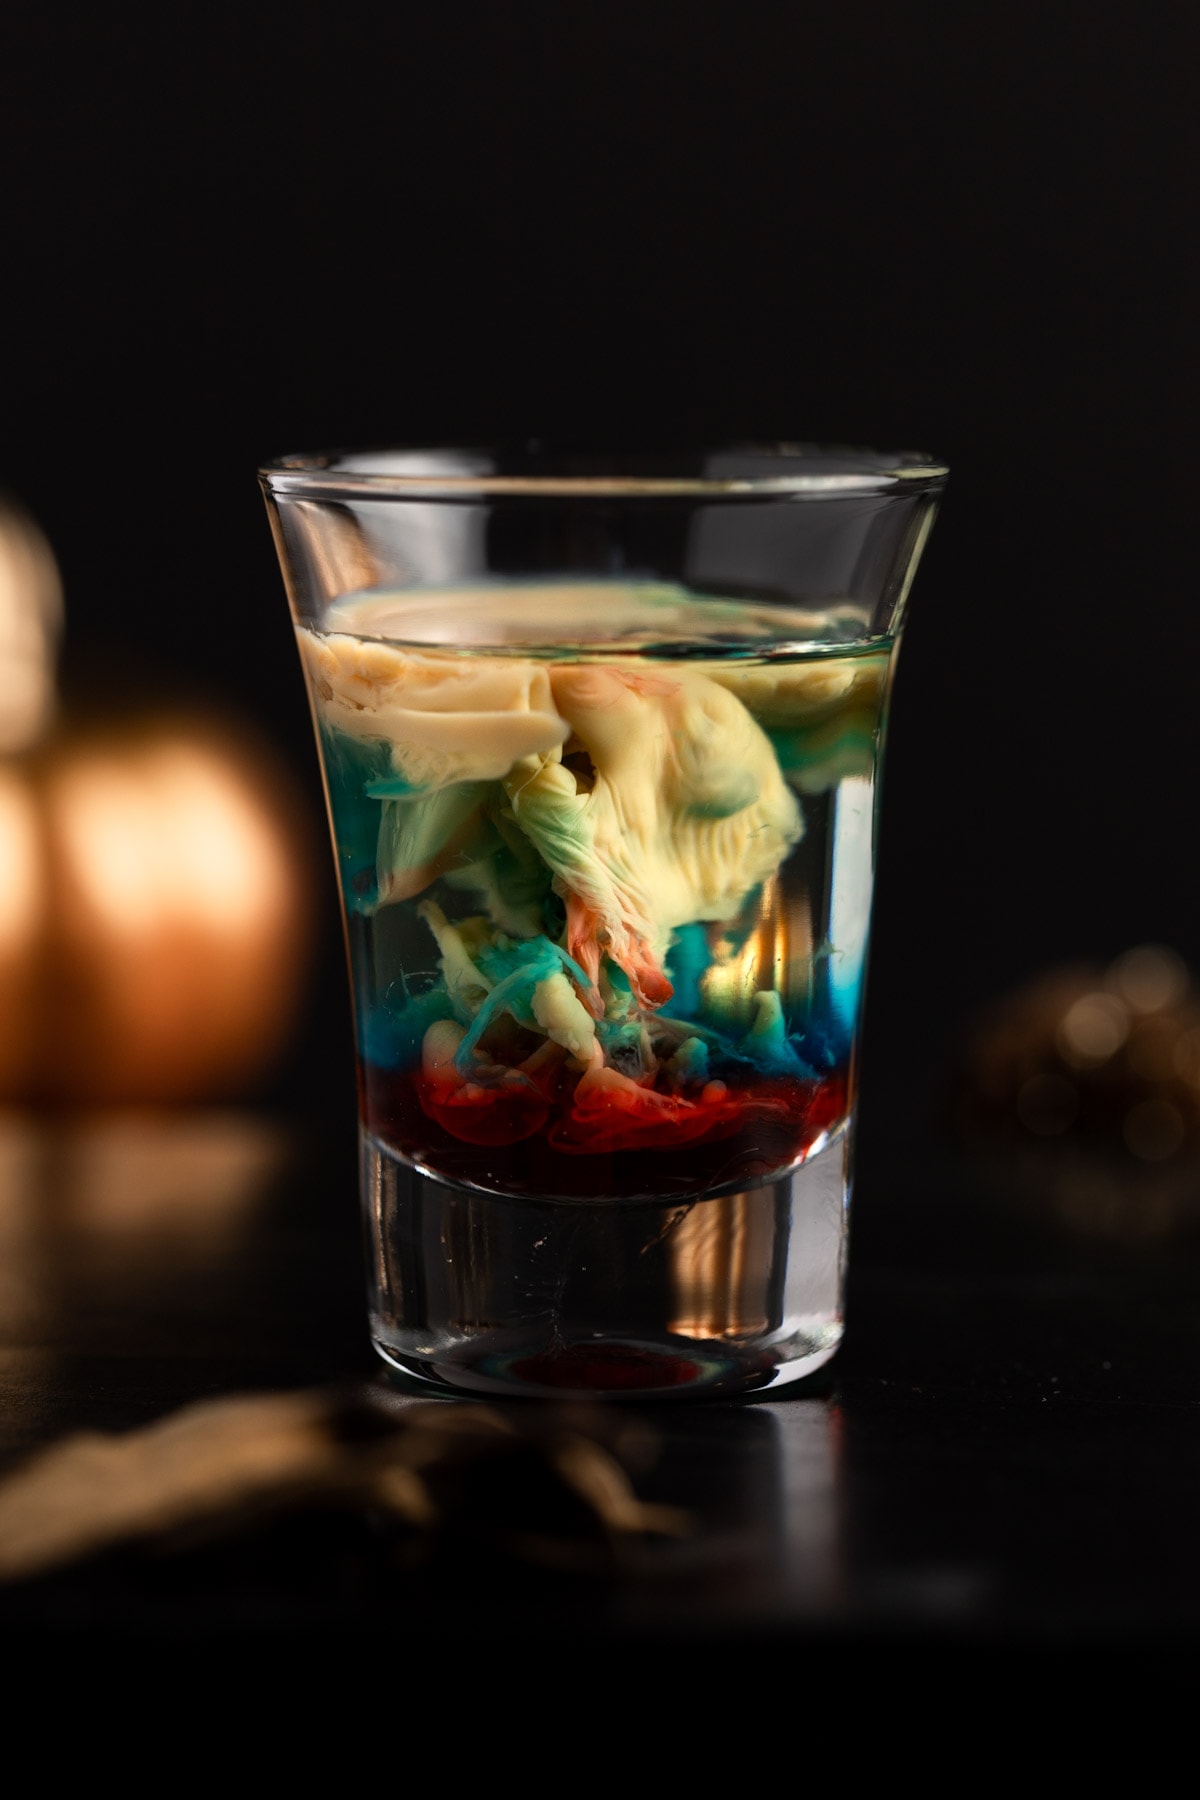 Alien brain hemorrhage shot with mixed red and blue colors, on a black background.